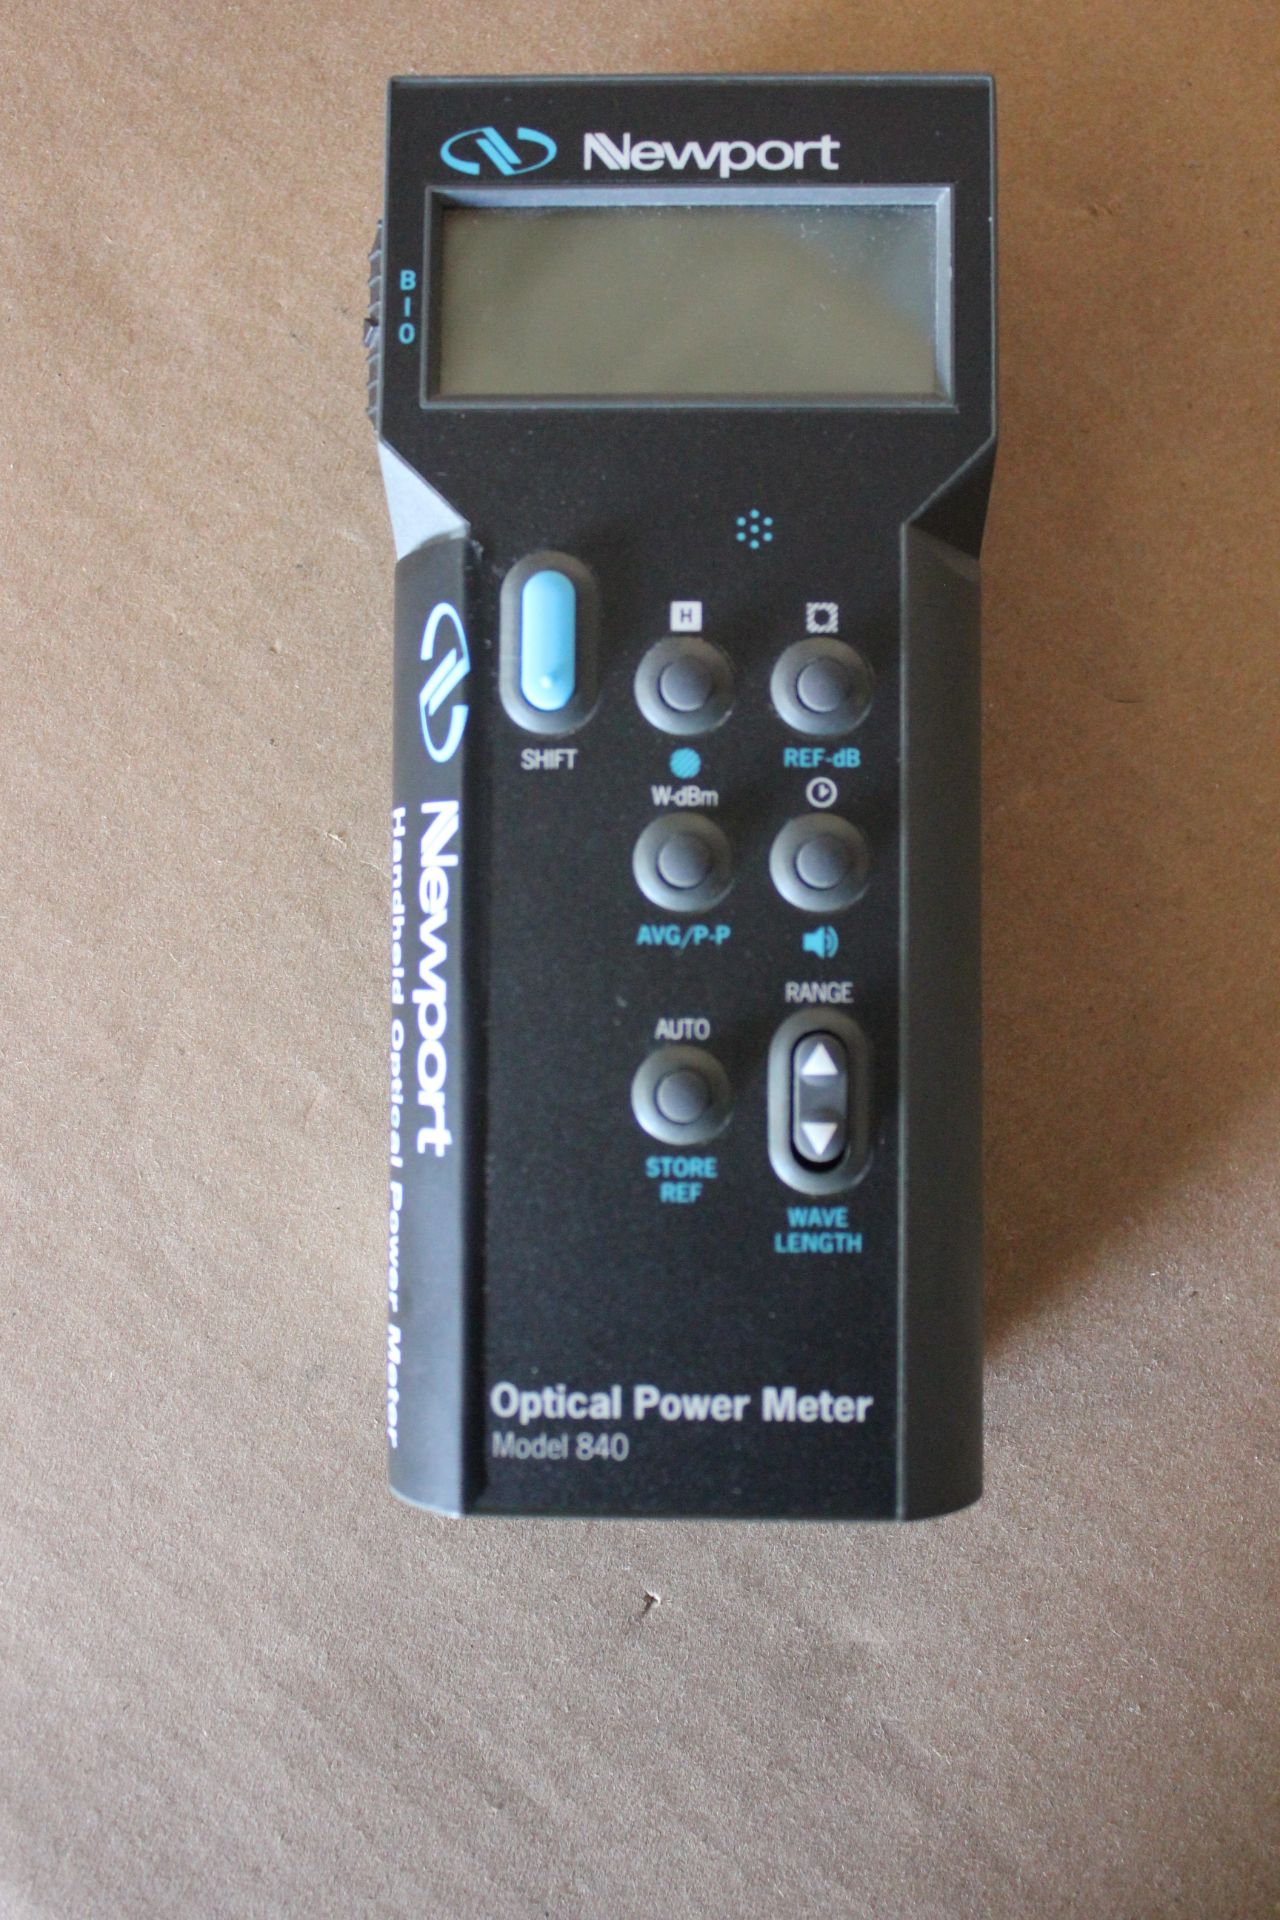 NEWPORT OPTICAL POWER METER WITH CASE - Image 4 of 12